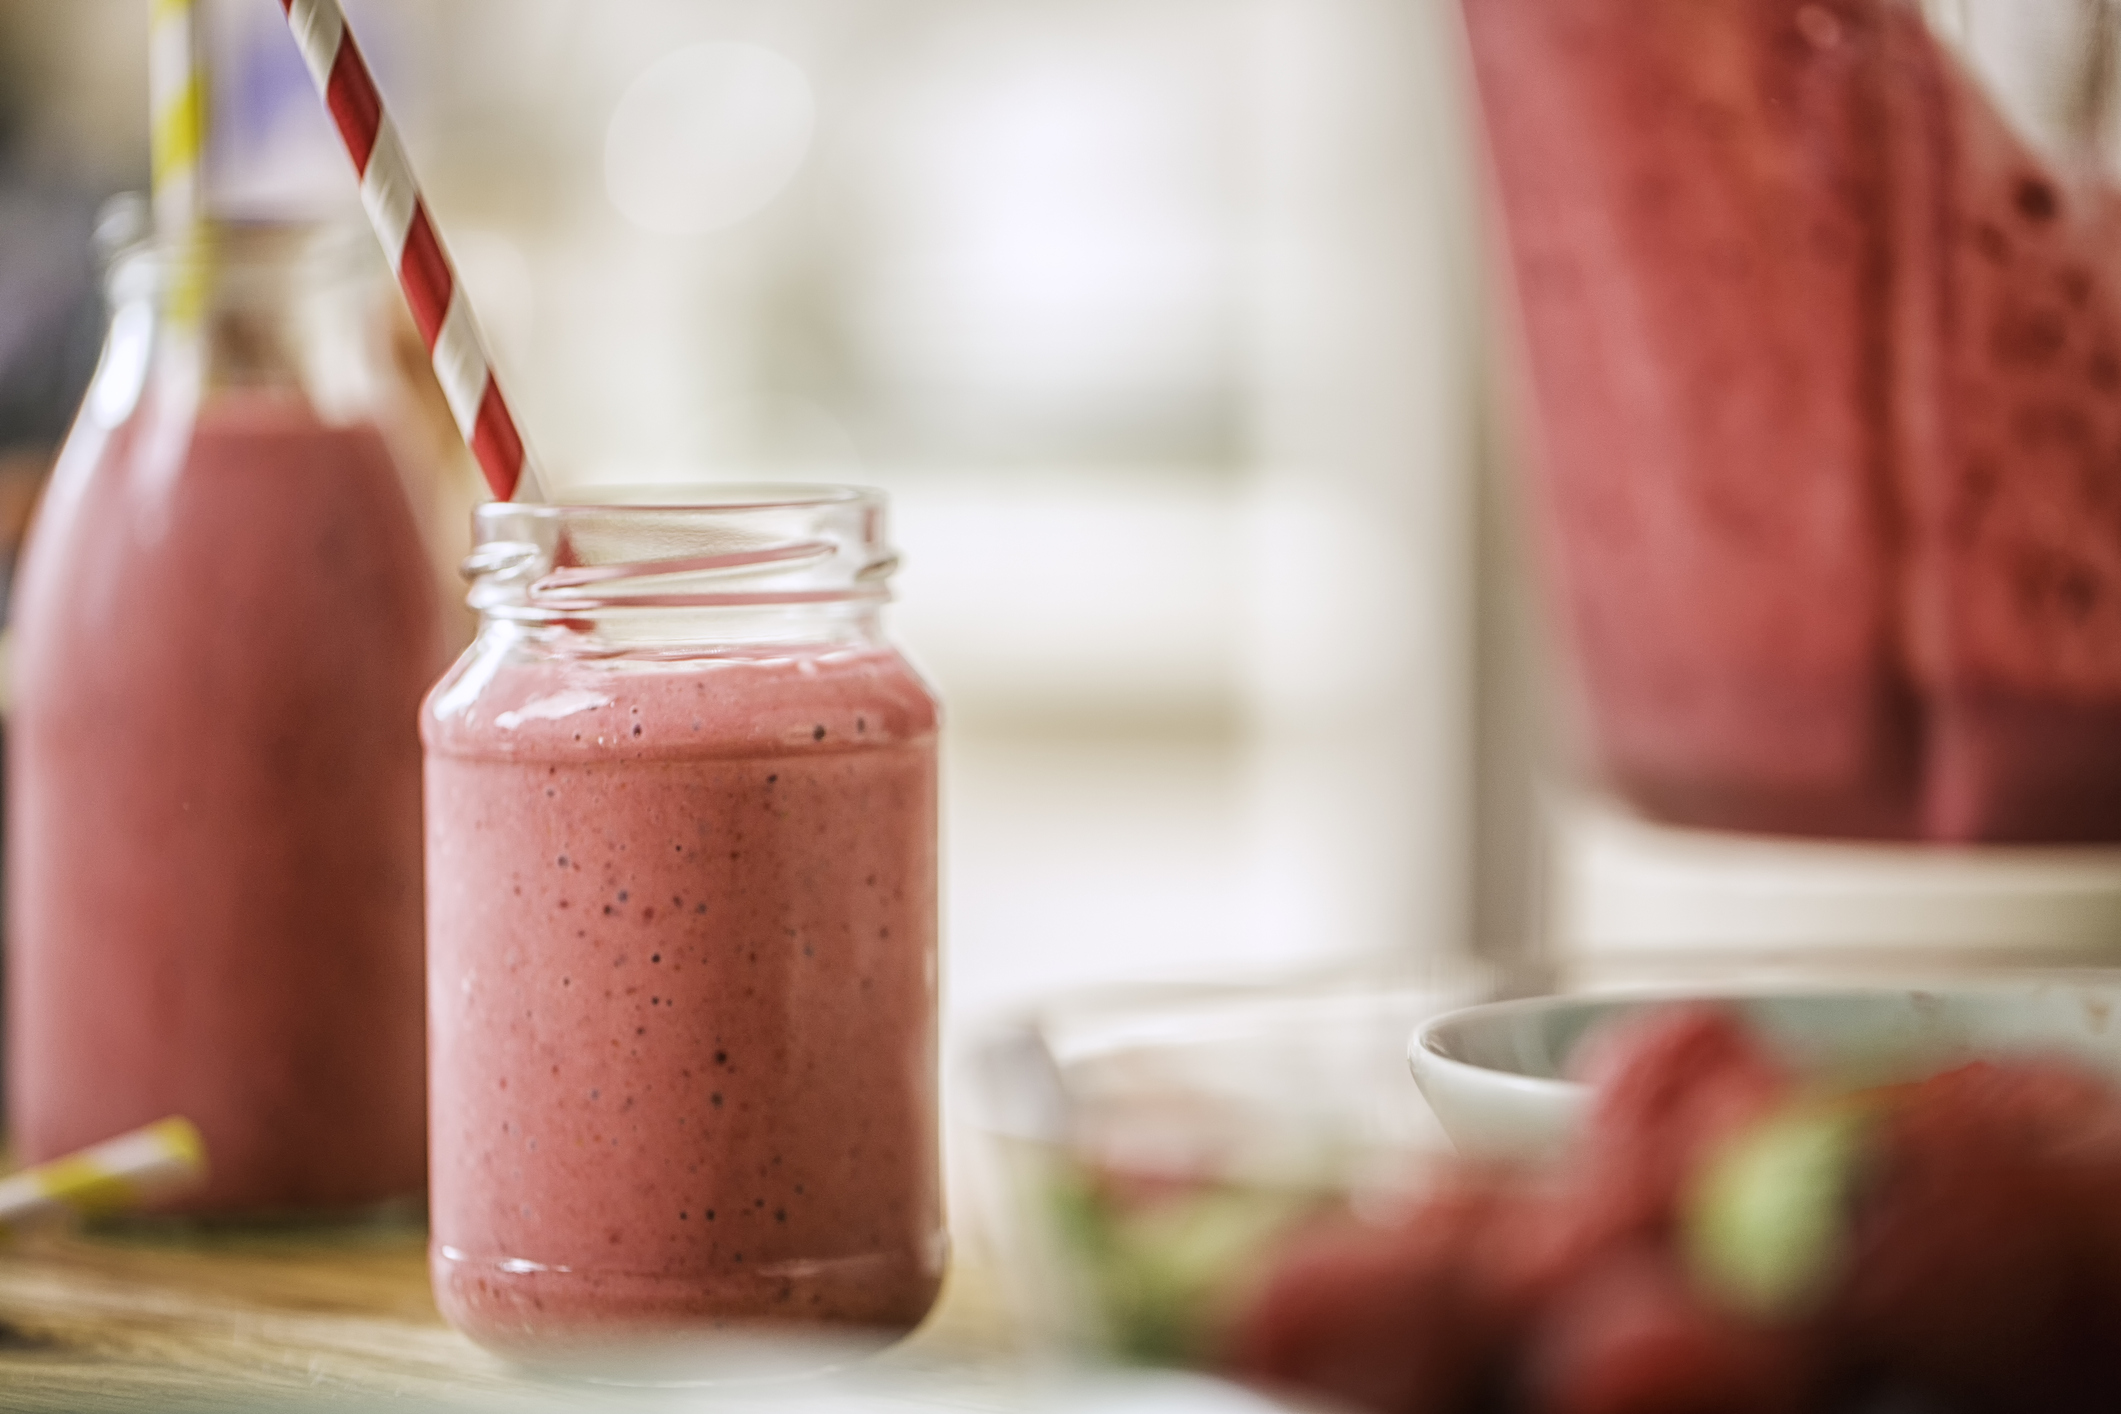 Even The Pickiest Eater Will Love This Smoothie - SavvyMom